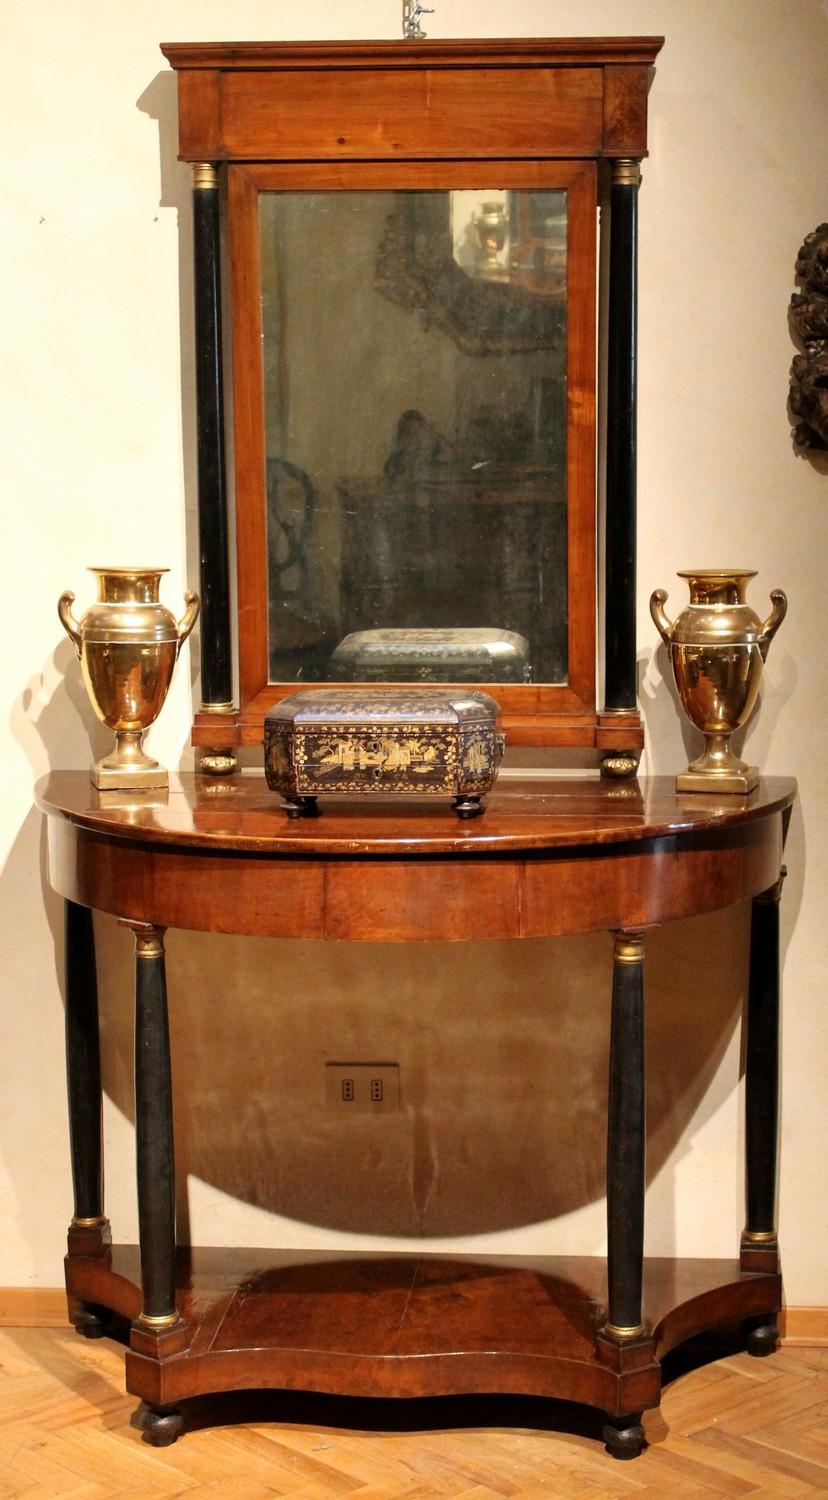 These beautiful antique Italian Empire demilune console tables with mirrors date back to early 19th Century. We can assume they were made in Florence, Italy and they come from a villa in the Tuscan countryside. 
These are a very good quality console